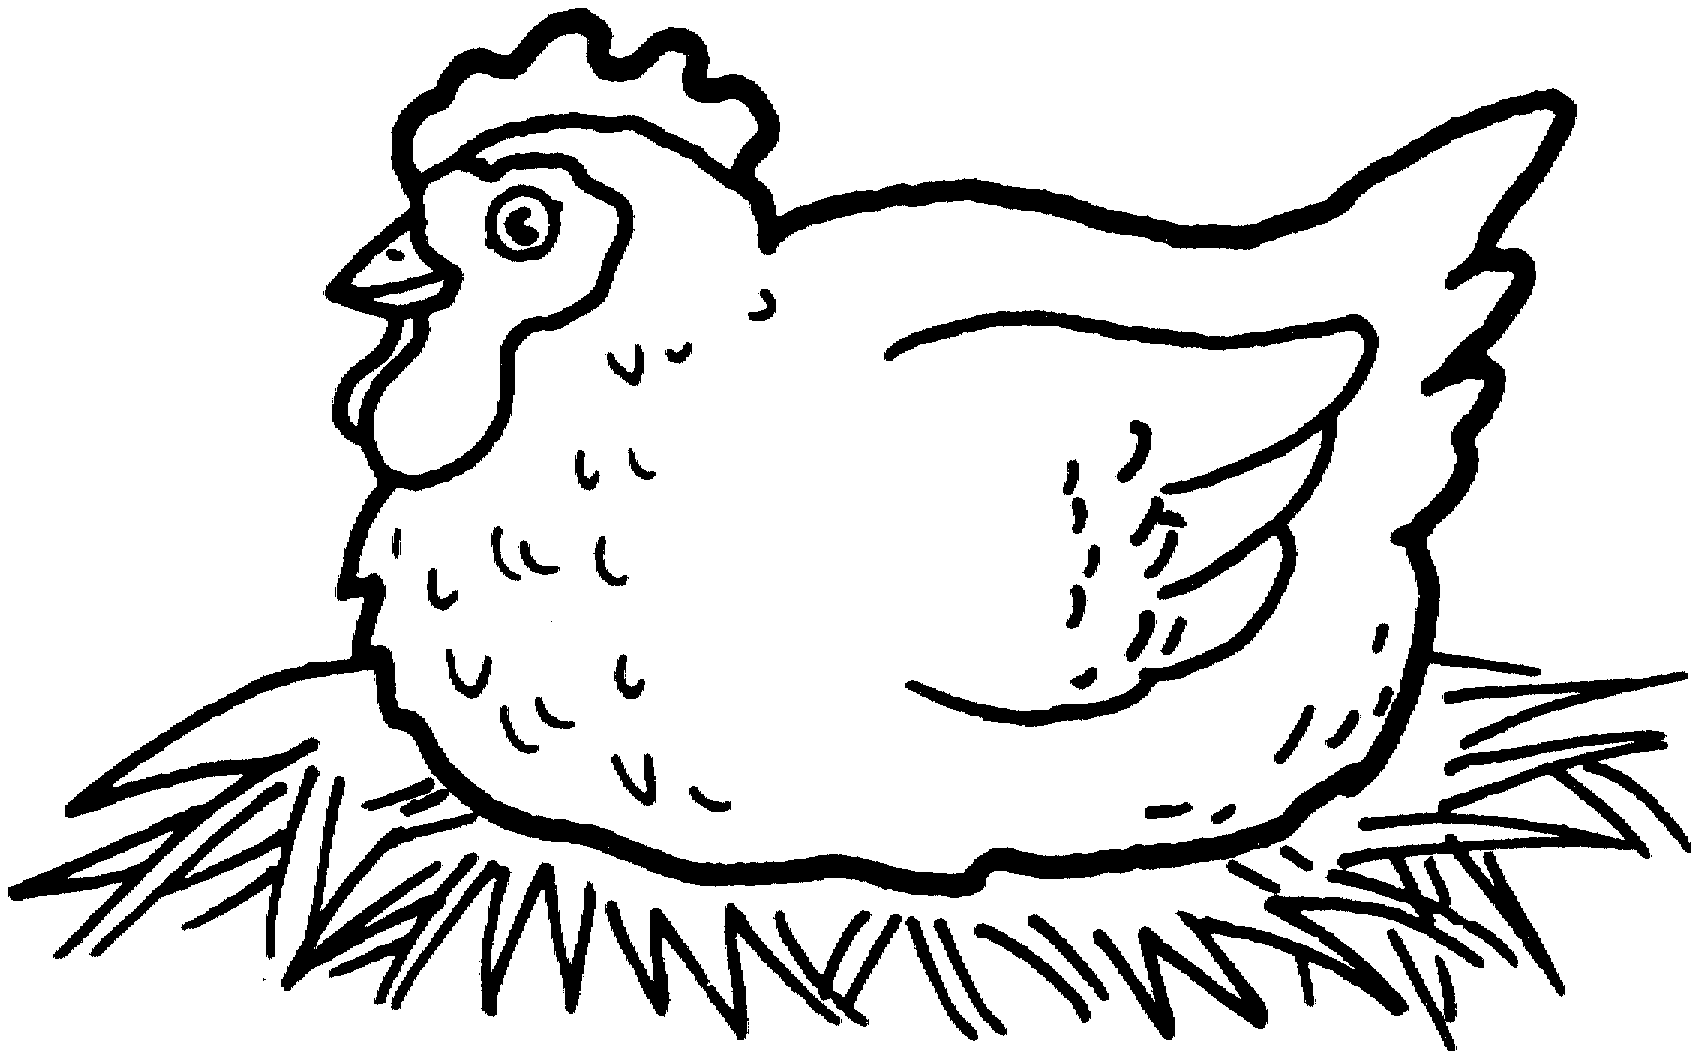 Chicken Coop Clipart Black And White wallpapers - High quality ...